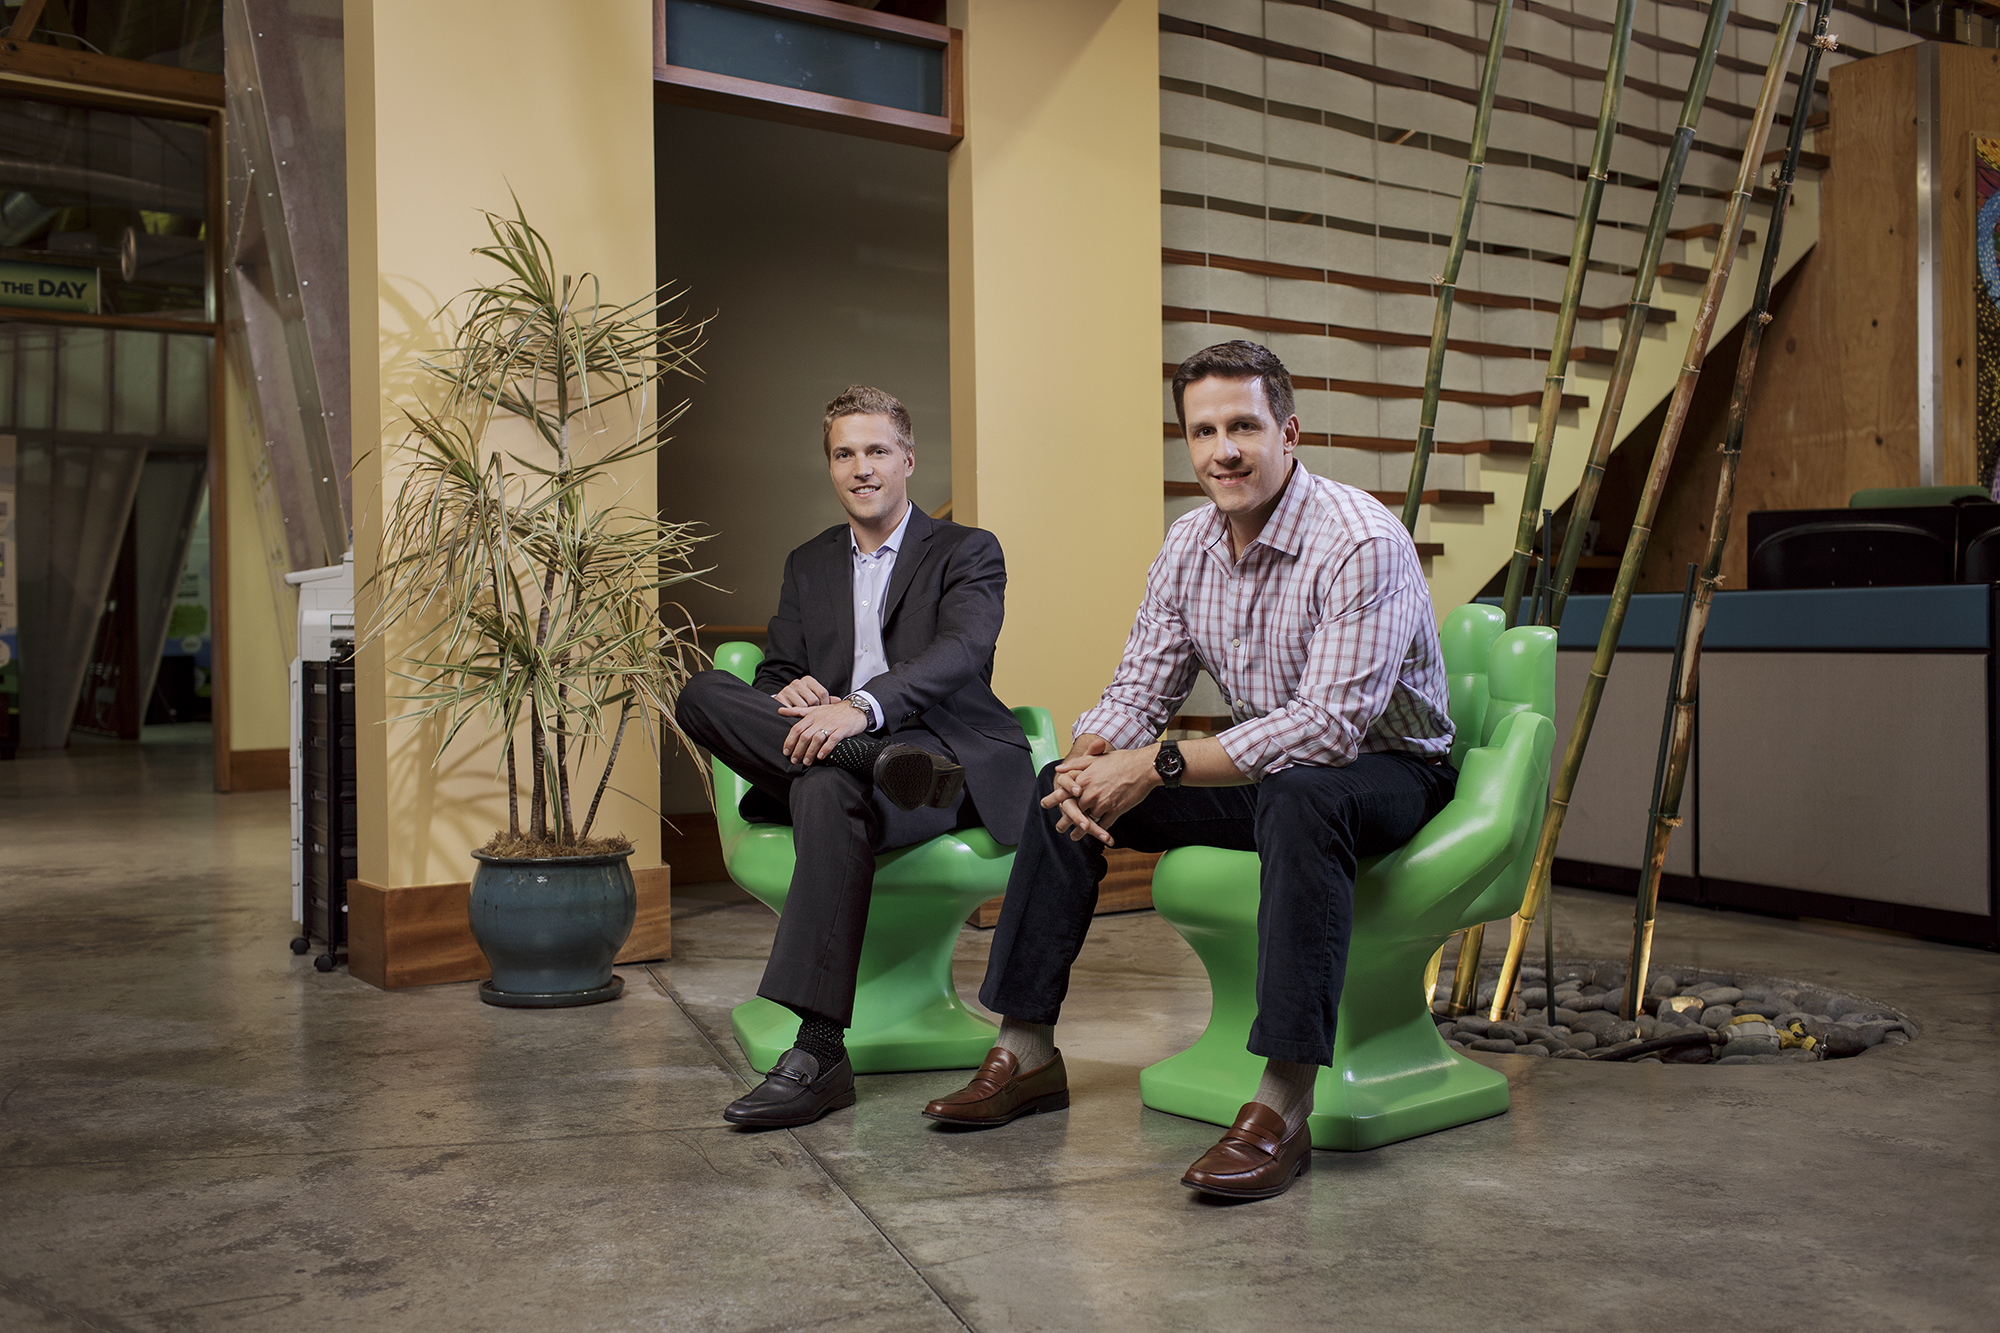 Sean Kelly (L) and Andy Mackensen (R) Co-Founded HUMAN in 2008 to make healthy food more convenient than junk food